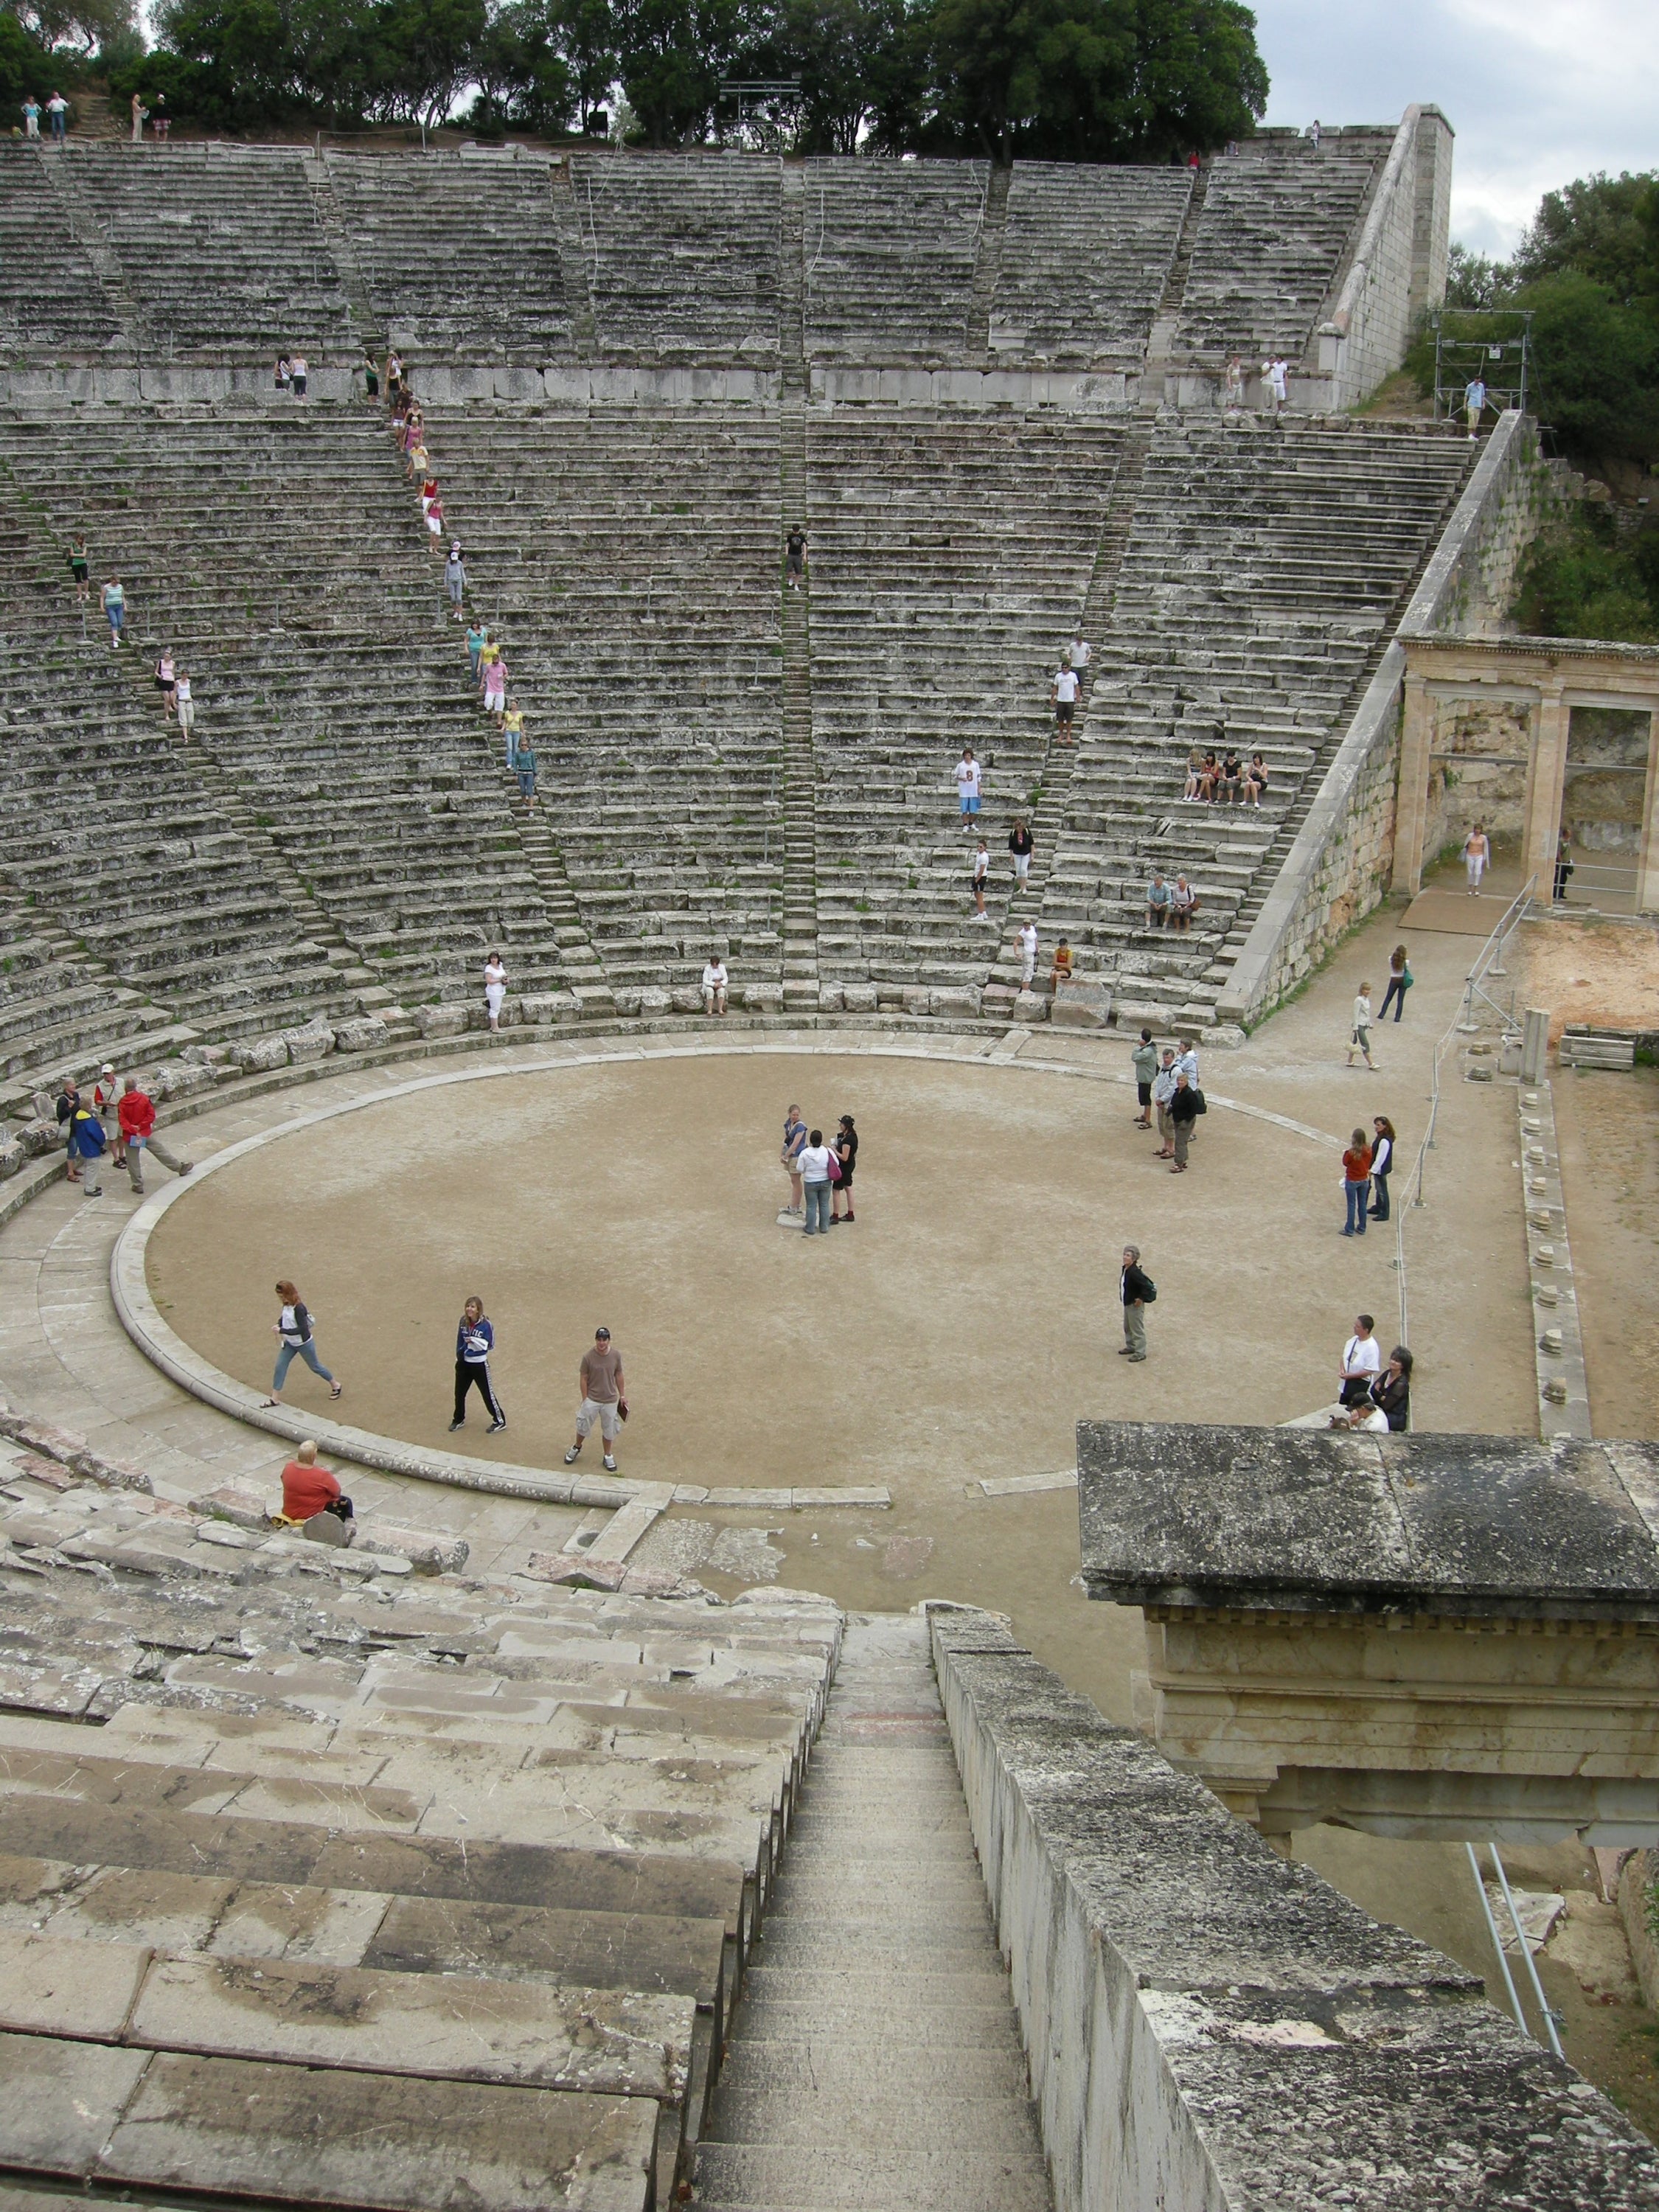 A Roman Ampitheatre showing a large, flat circle centre surrounded by concentric rows of seating, each ring elevated above the previous one